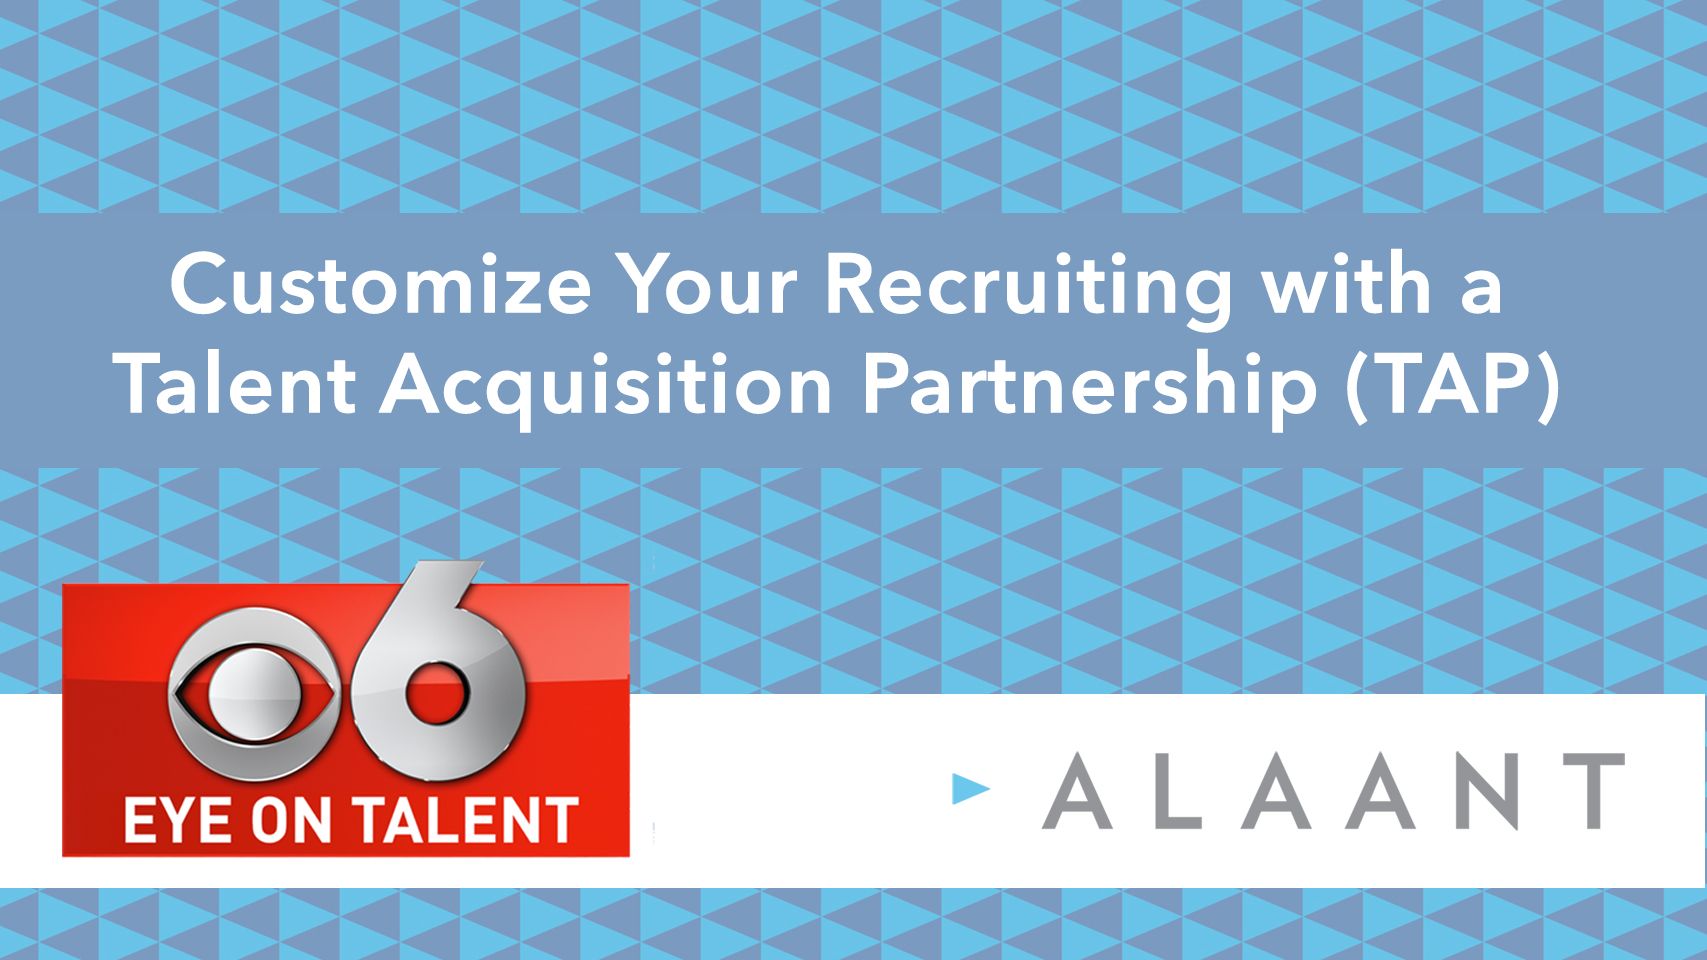 Alaant Eye Customize Your Recruiting with a Talent Acquisition Partnership TAP